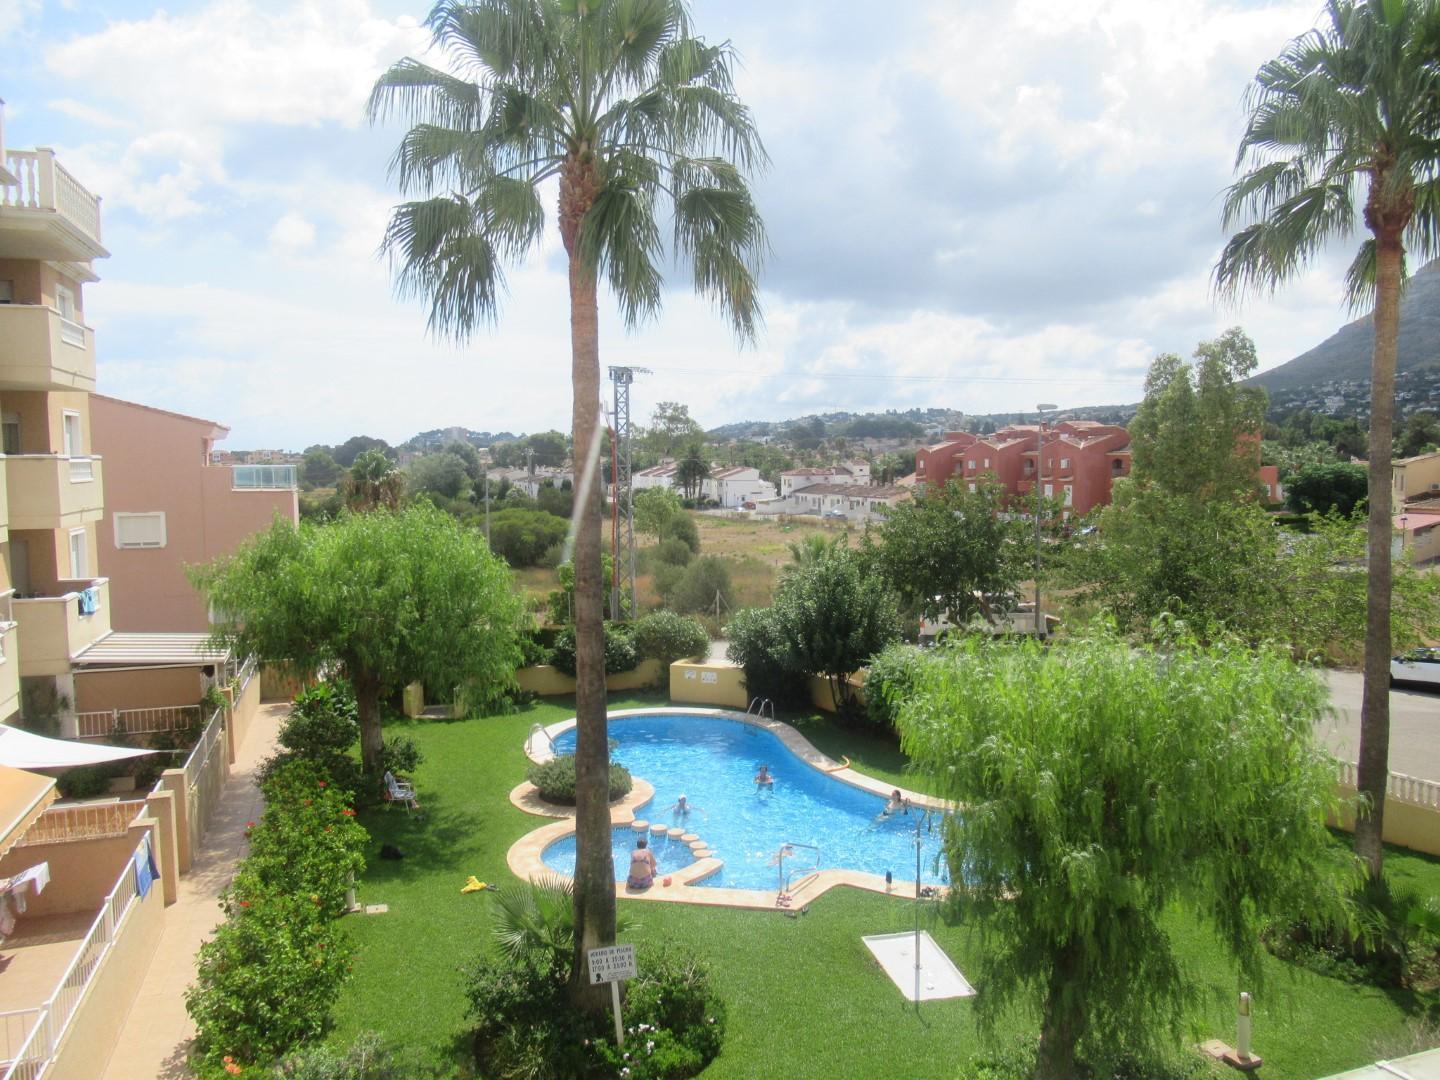 Apartment in DENIA 3 bedroom apartment for sale in DENIA with swimming pool